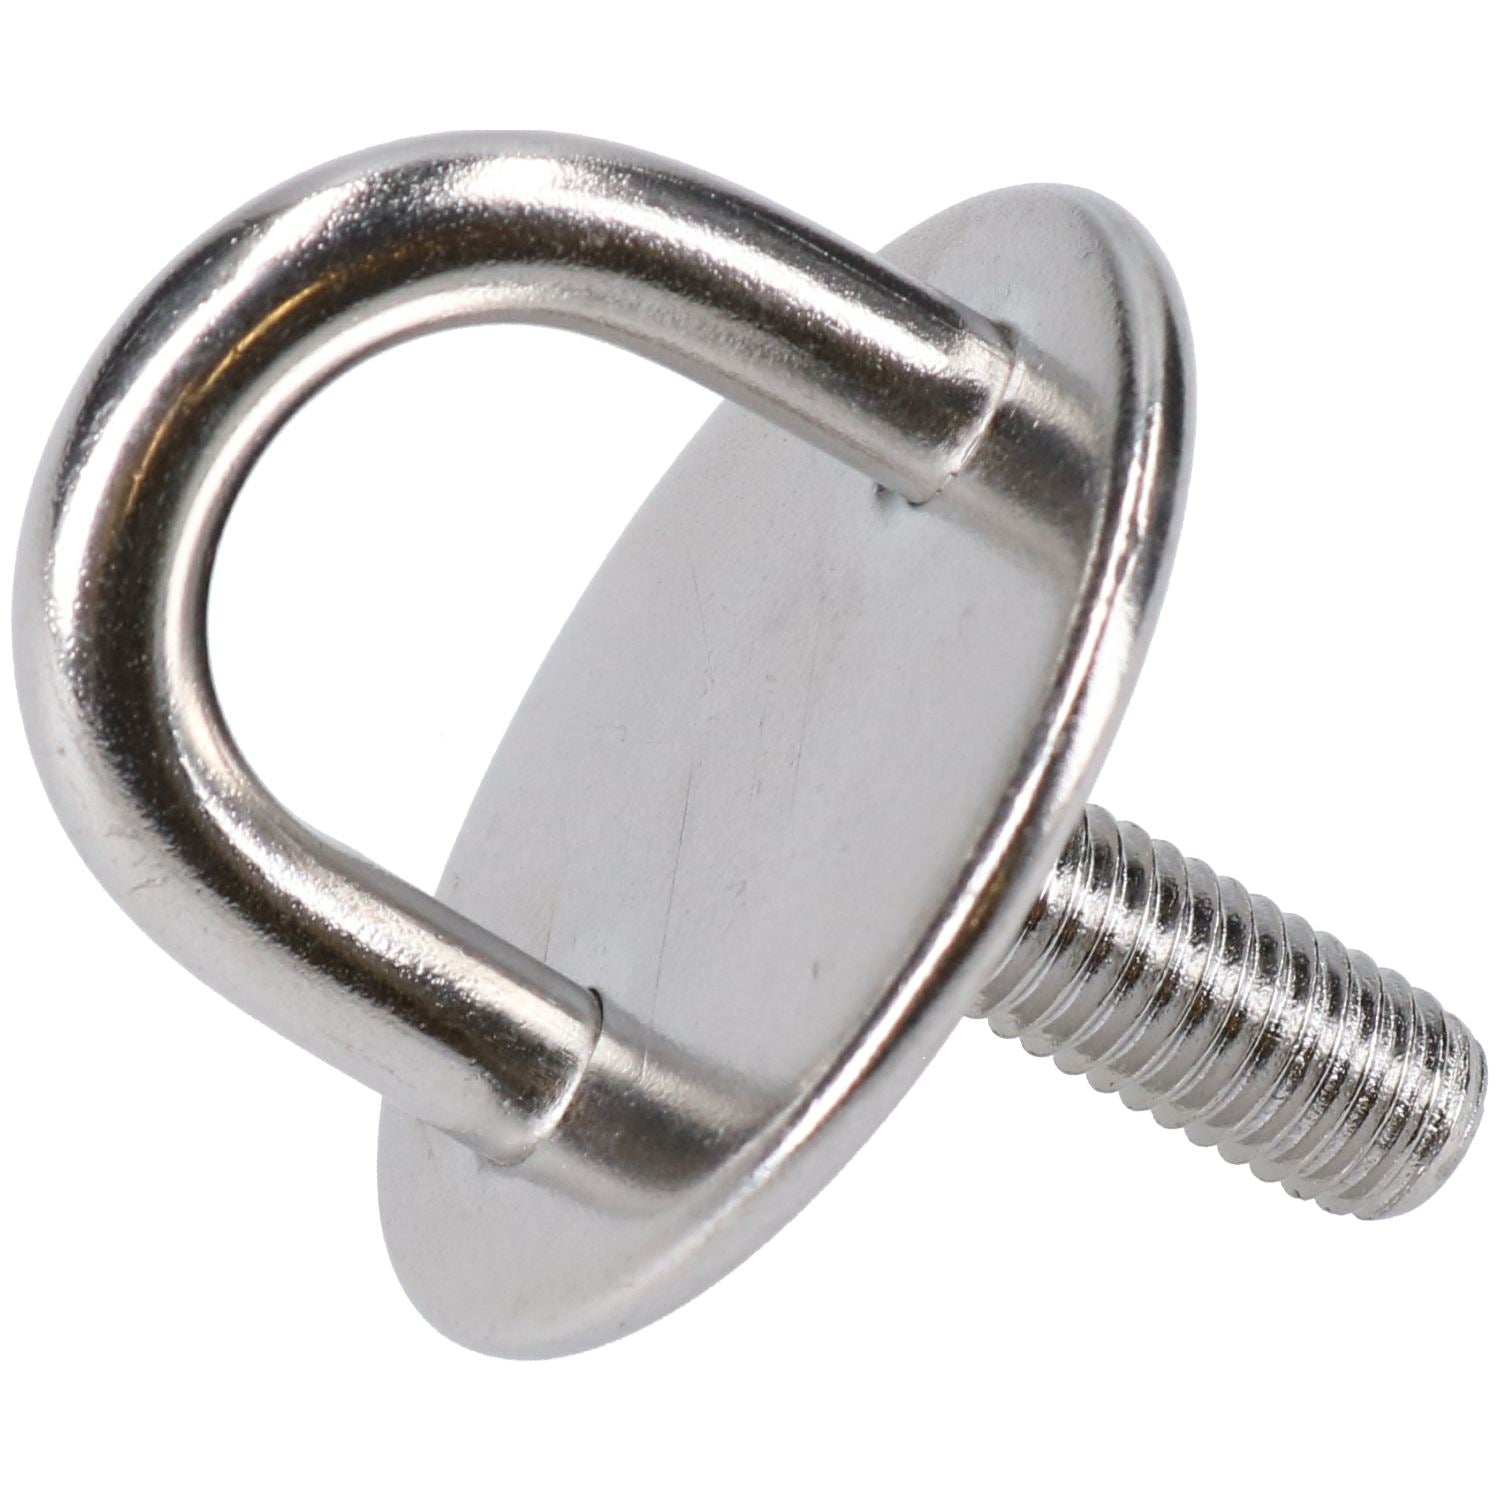 Round Pad Eye Tie Down Anchor Ring Stainless Steel M8 Thread